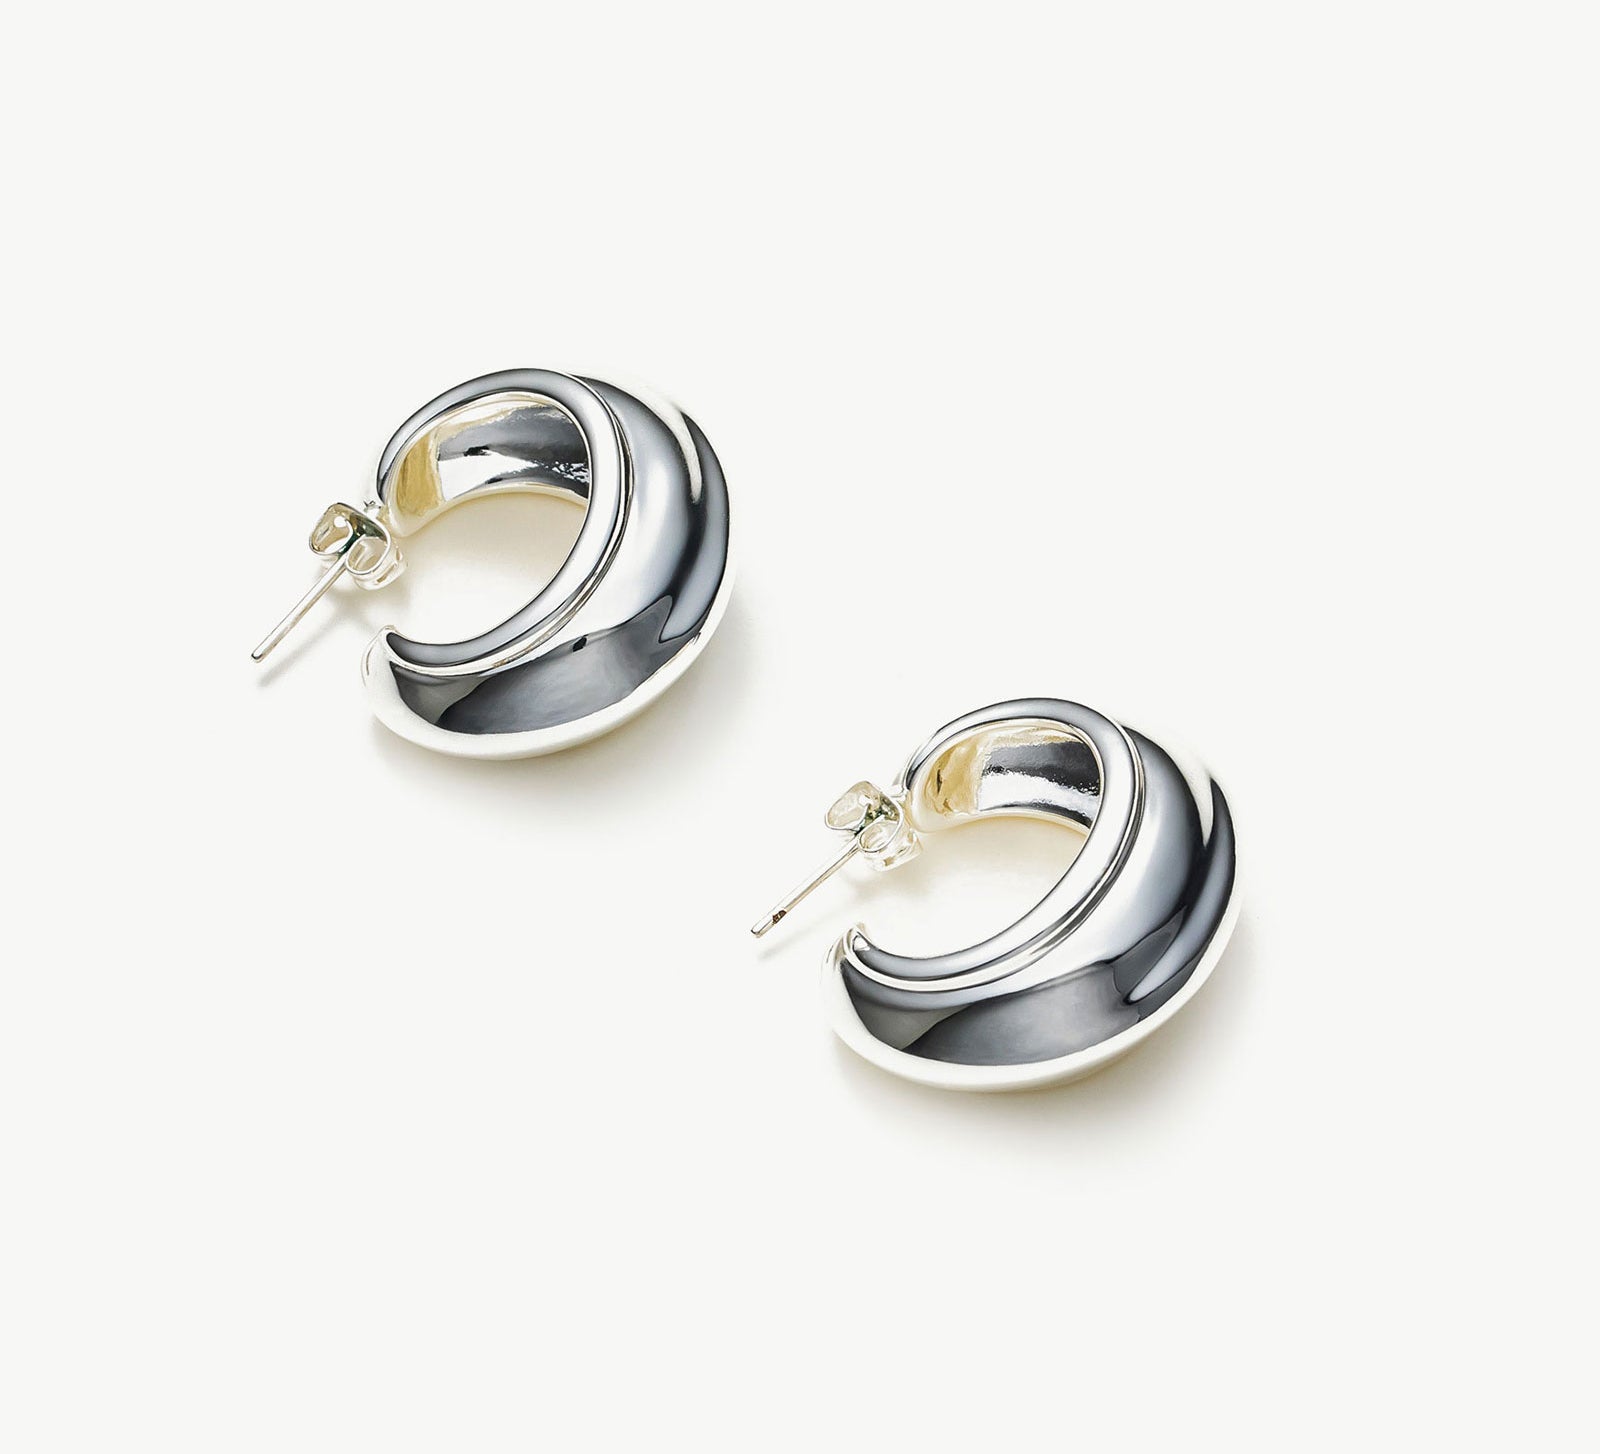 Modern Ridge Elegance: Ridge Hoop Earrings, showcasing a modern ridge design, these earrings exude elegance with a touch of contemporary flair, making them a stylish accessory for any occasion.